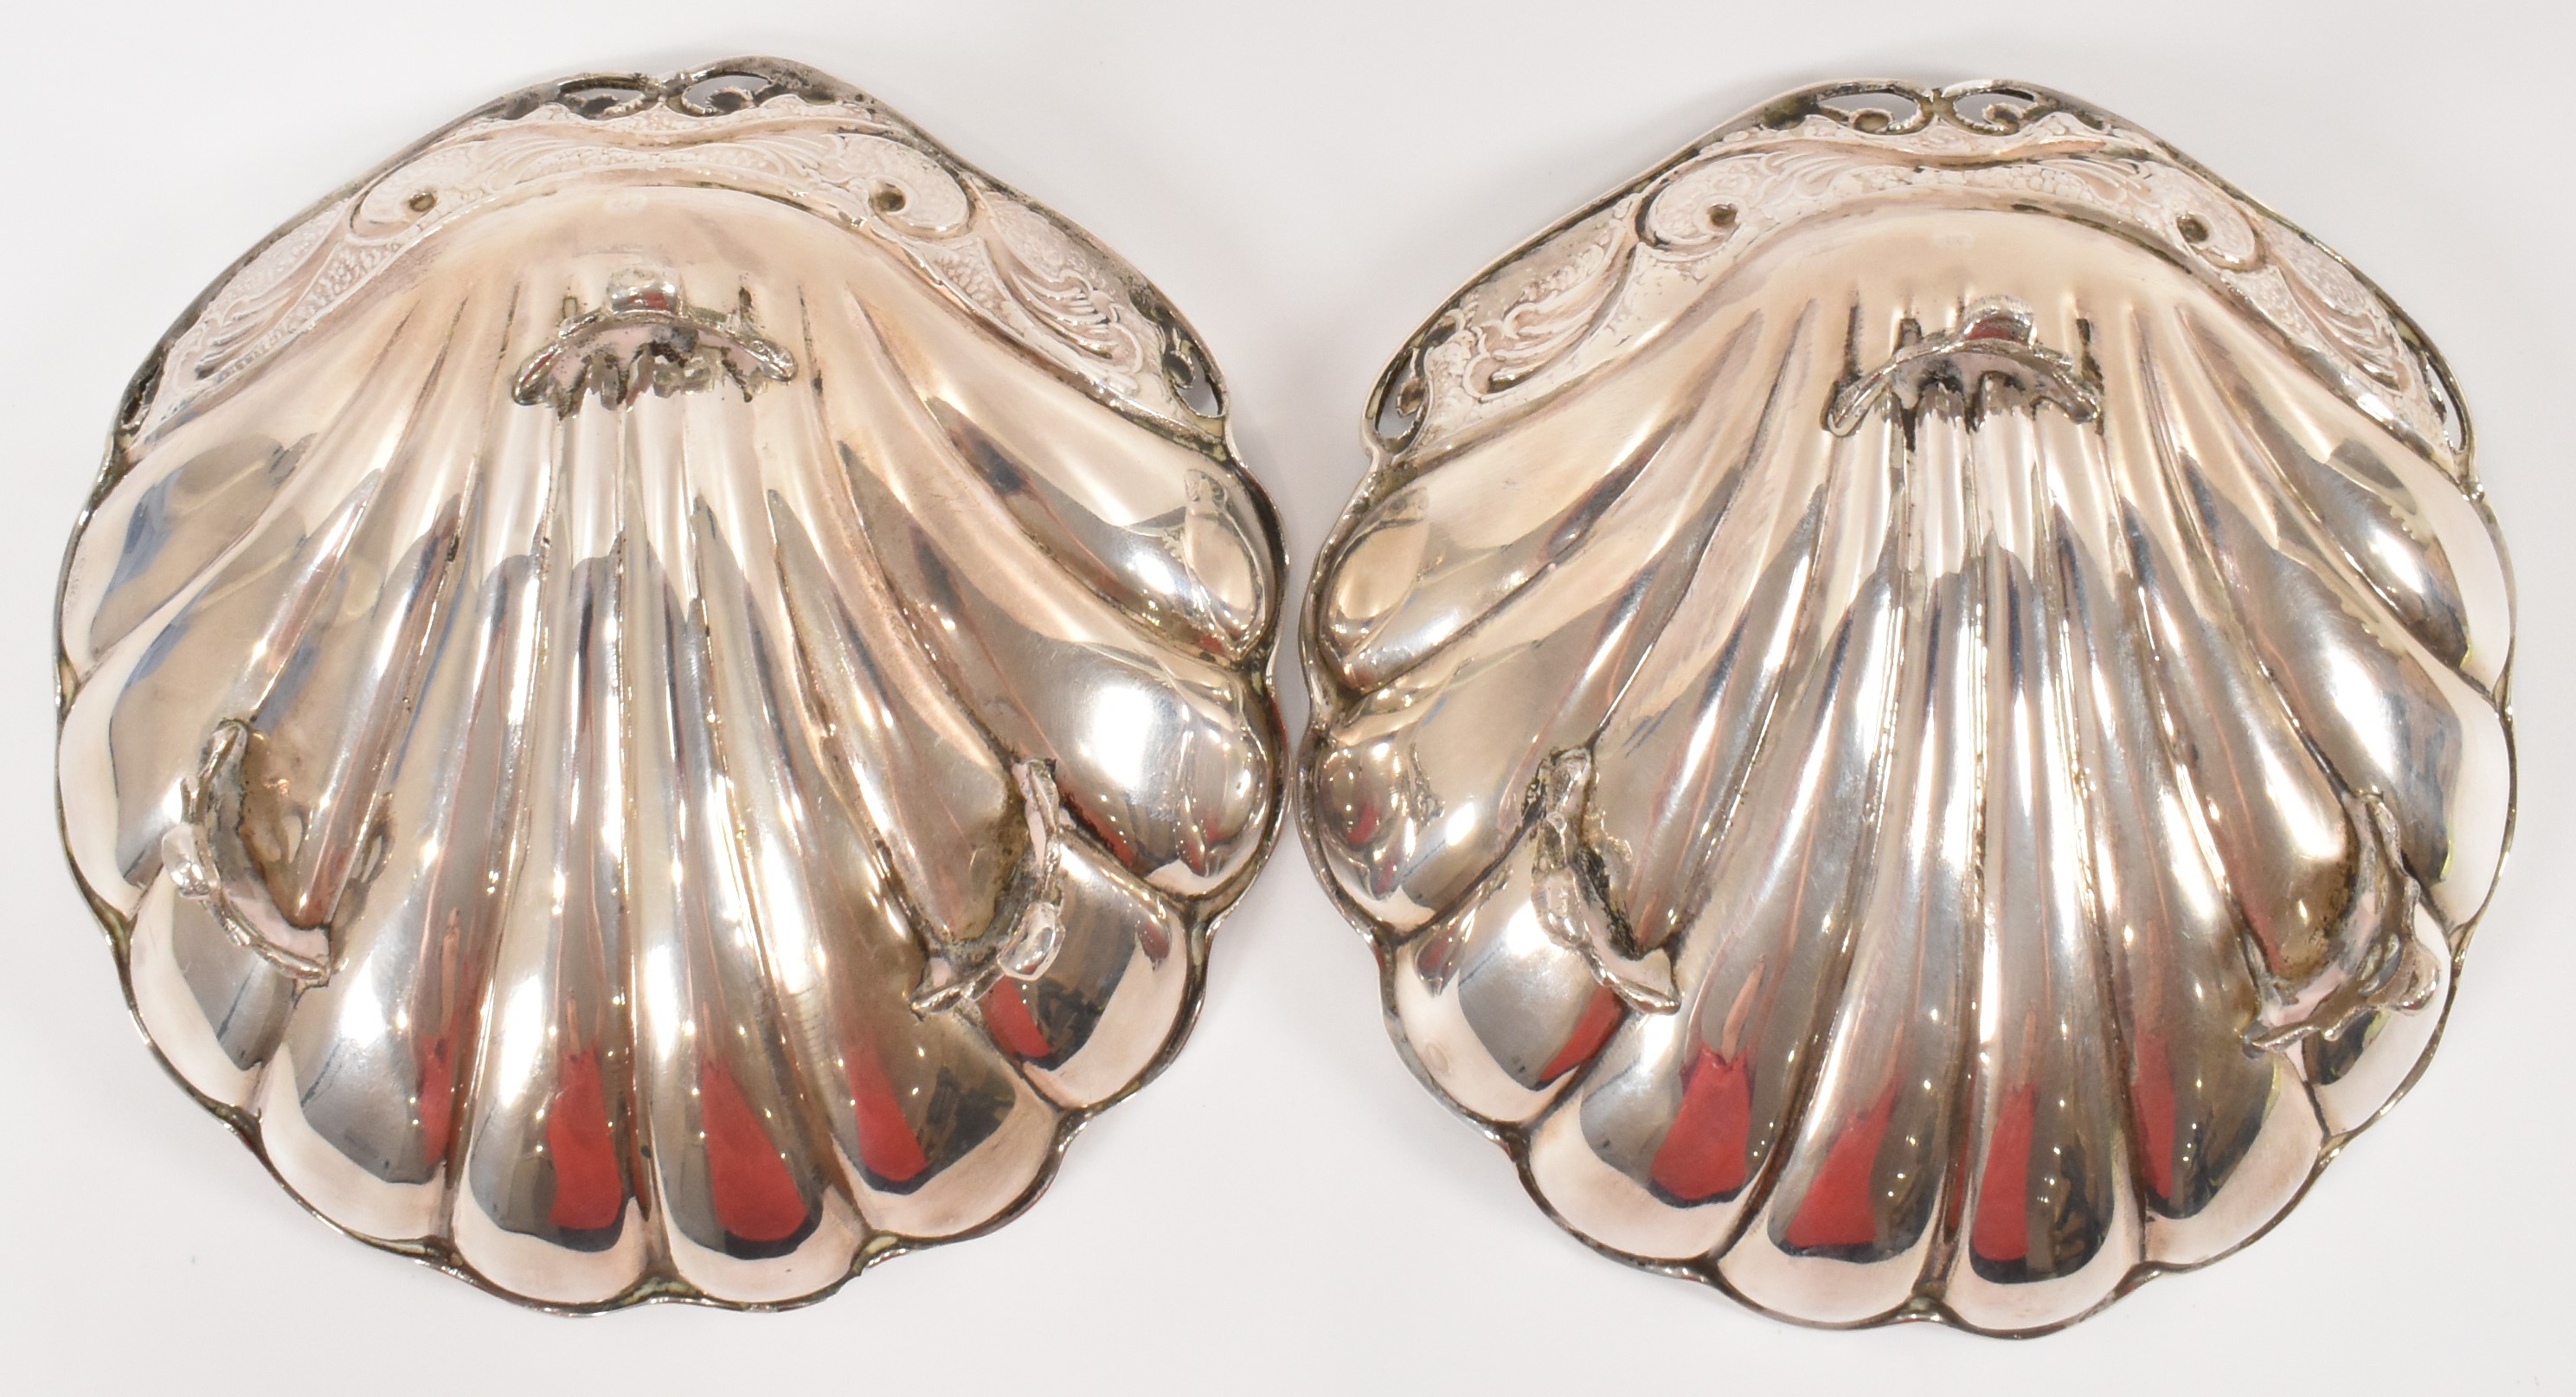 PAIR OF SILVER SCALLOP SHELL BOWLS - Image 6 of 7